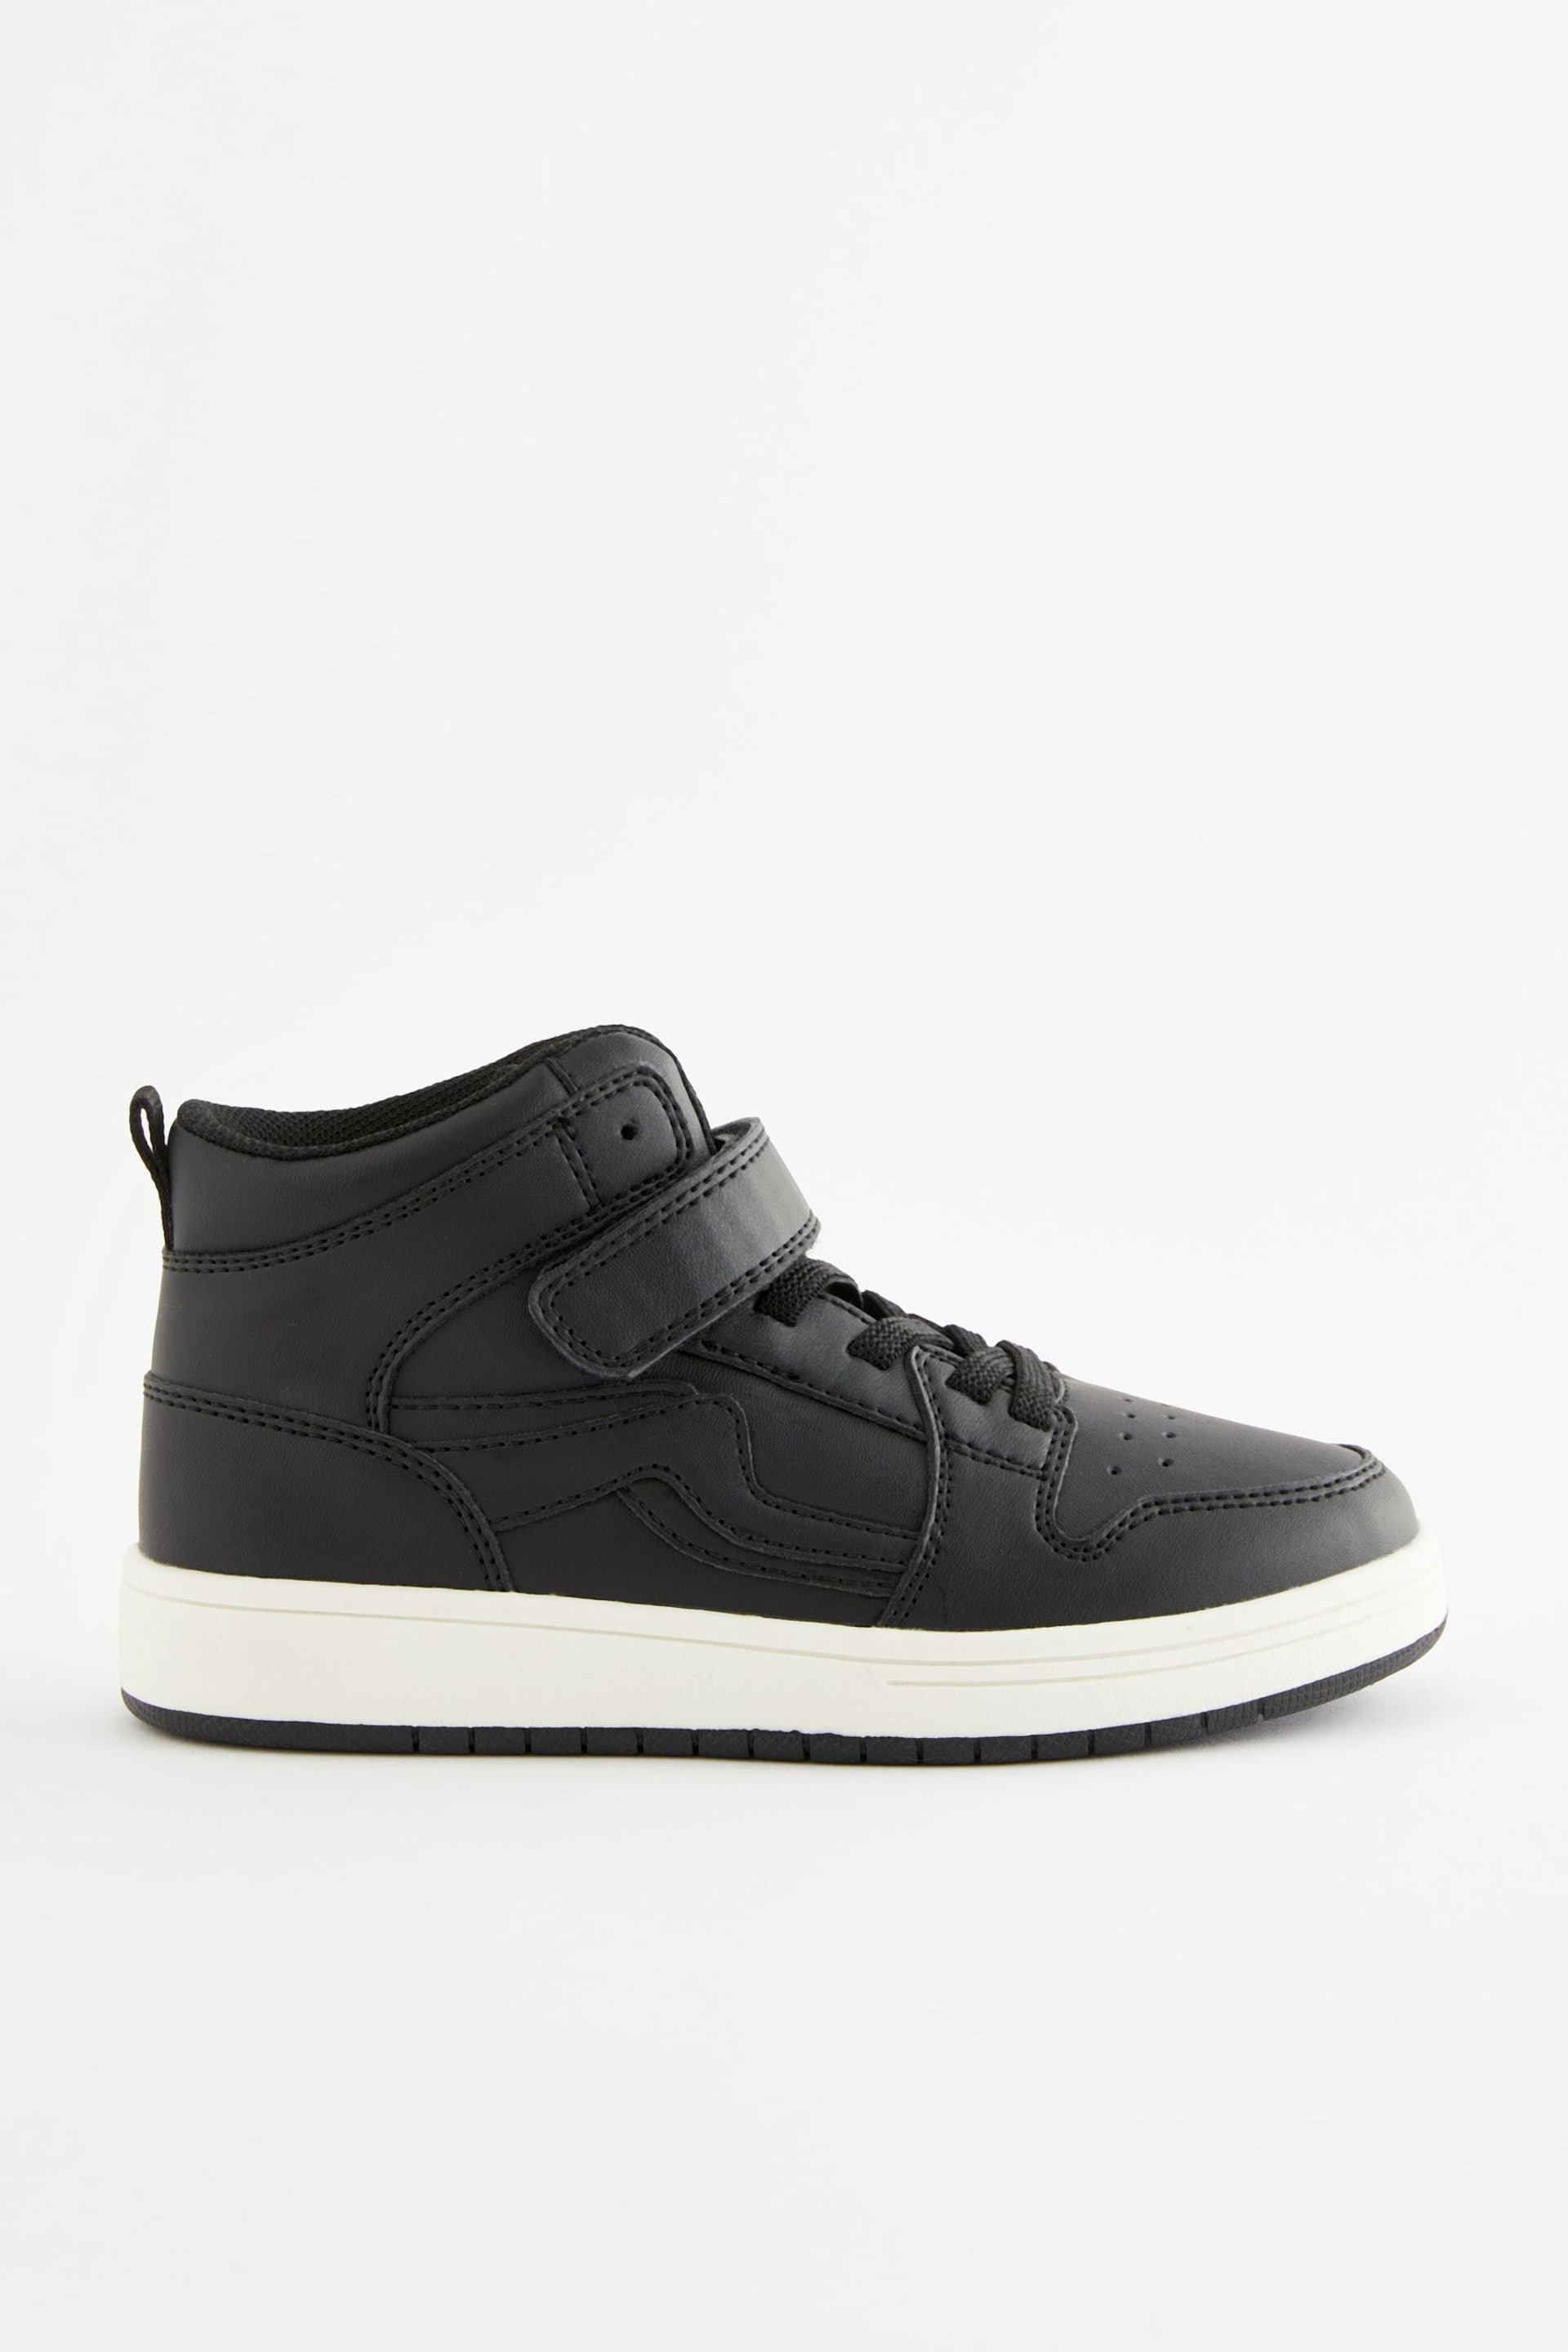 Black Elastic Lace High Top Trainers - Image 4 of 8